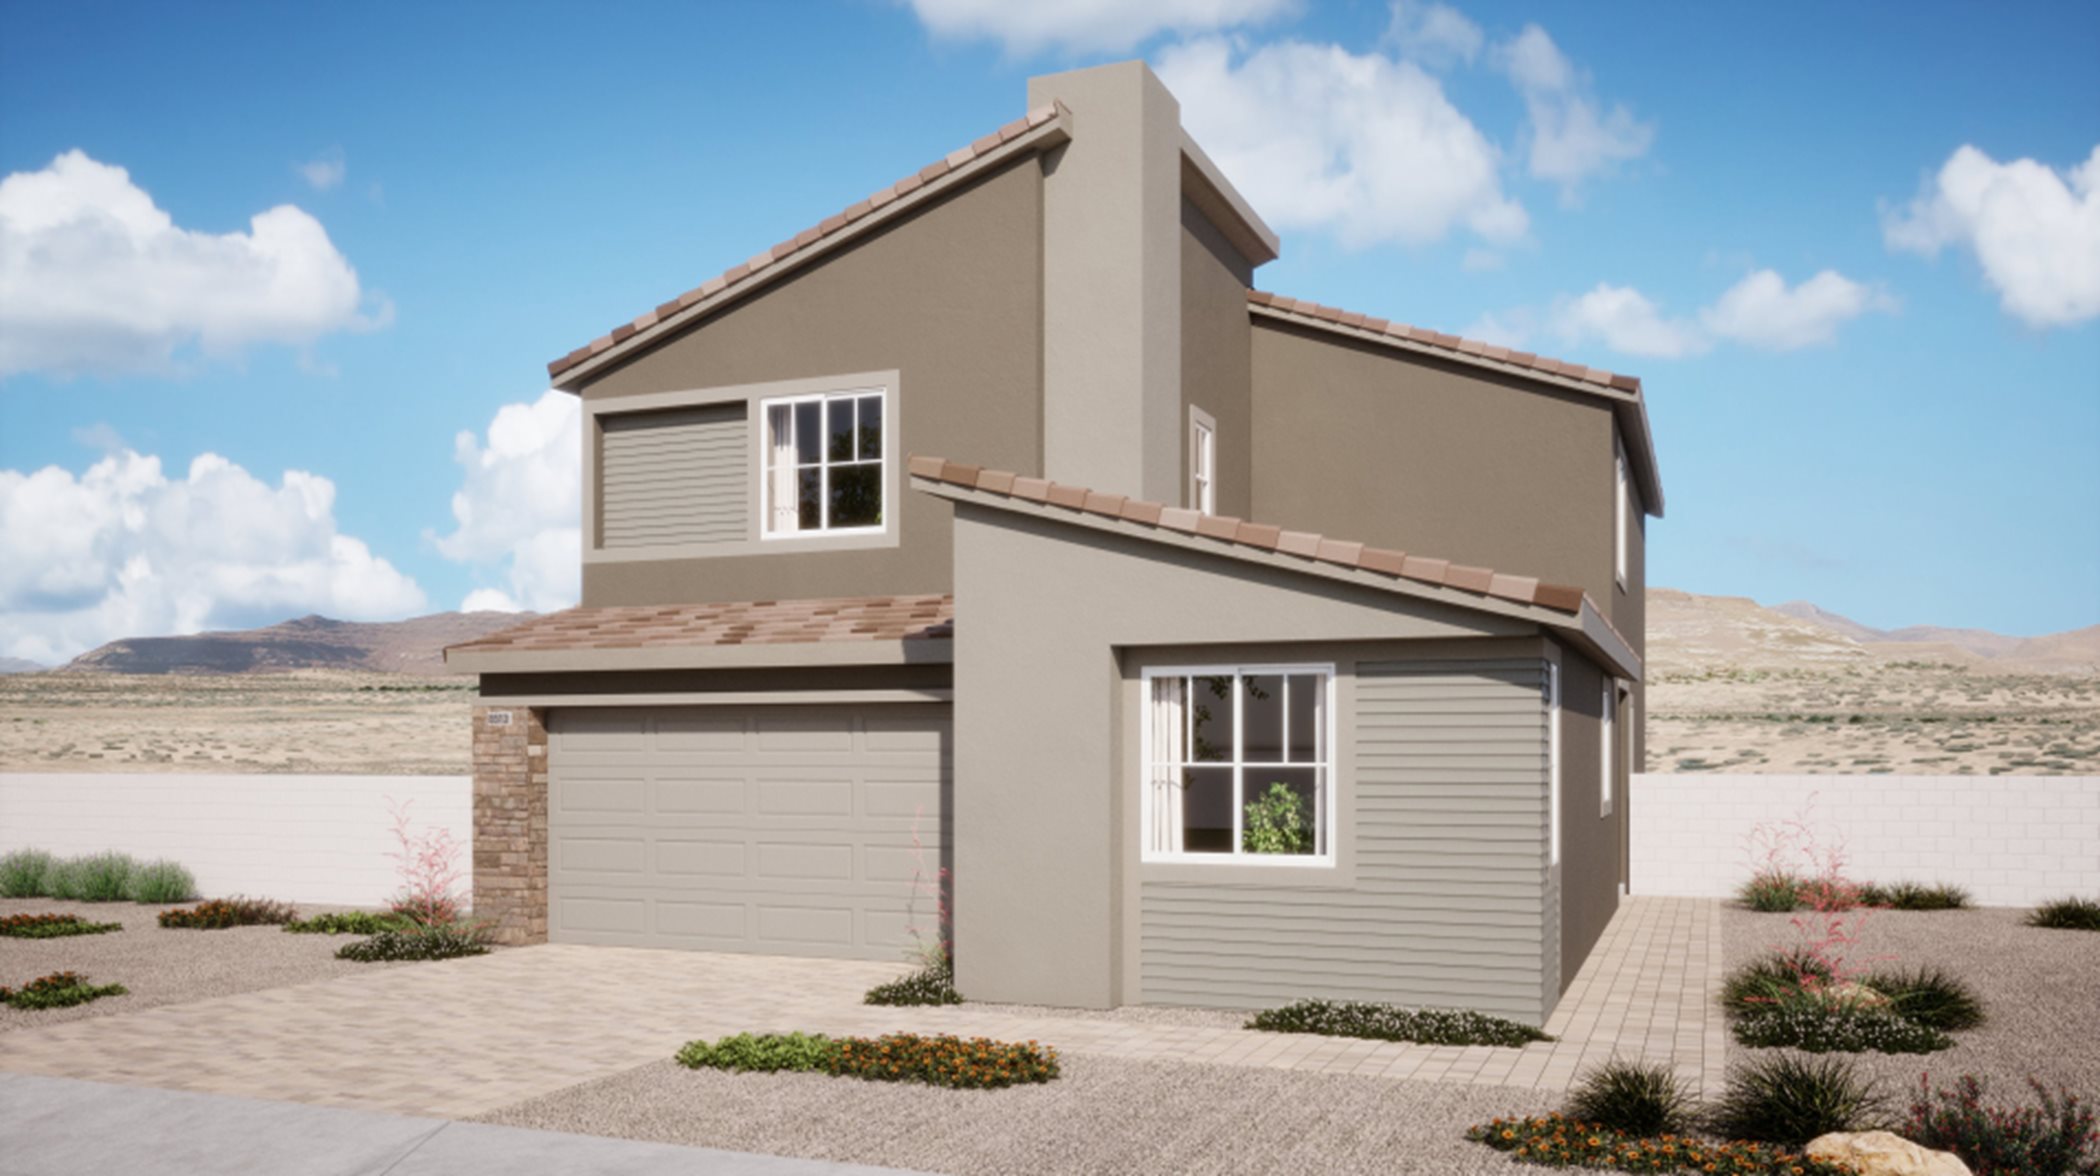 Exterior A  home rendering image